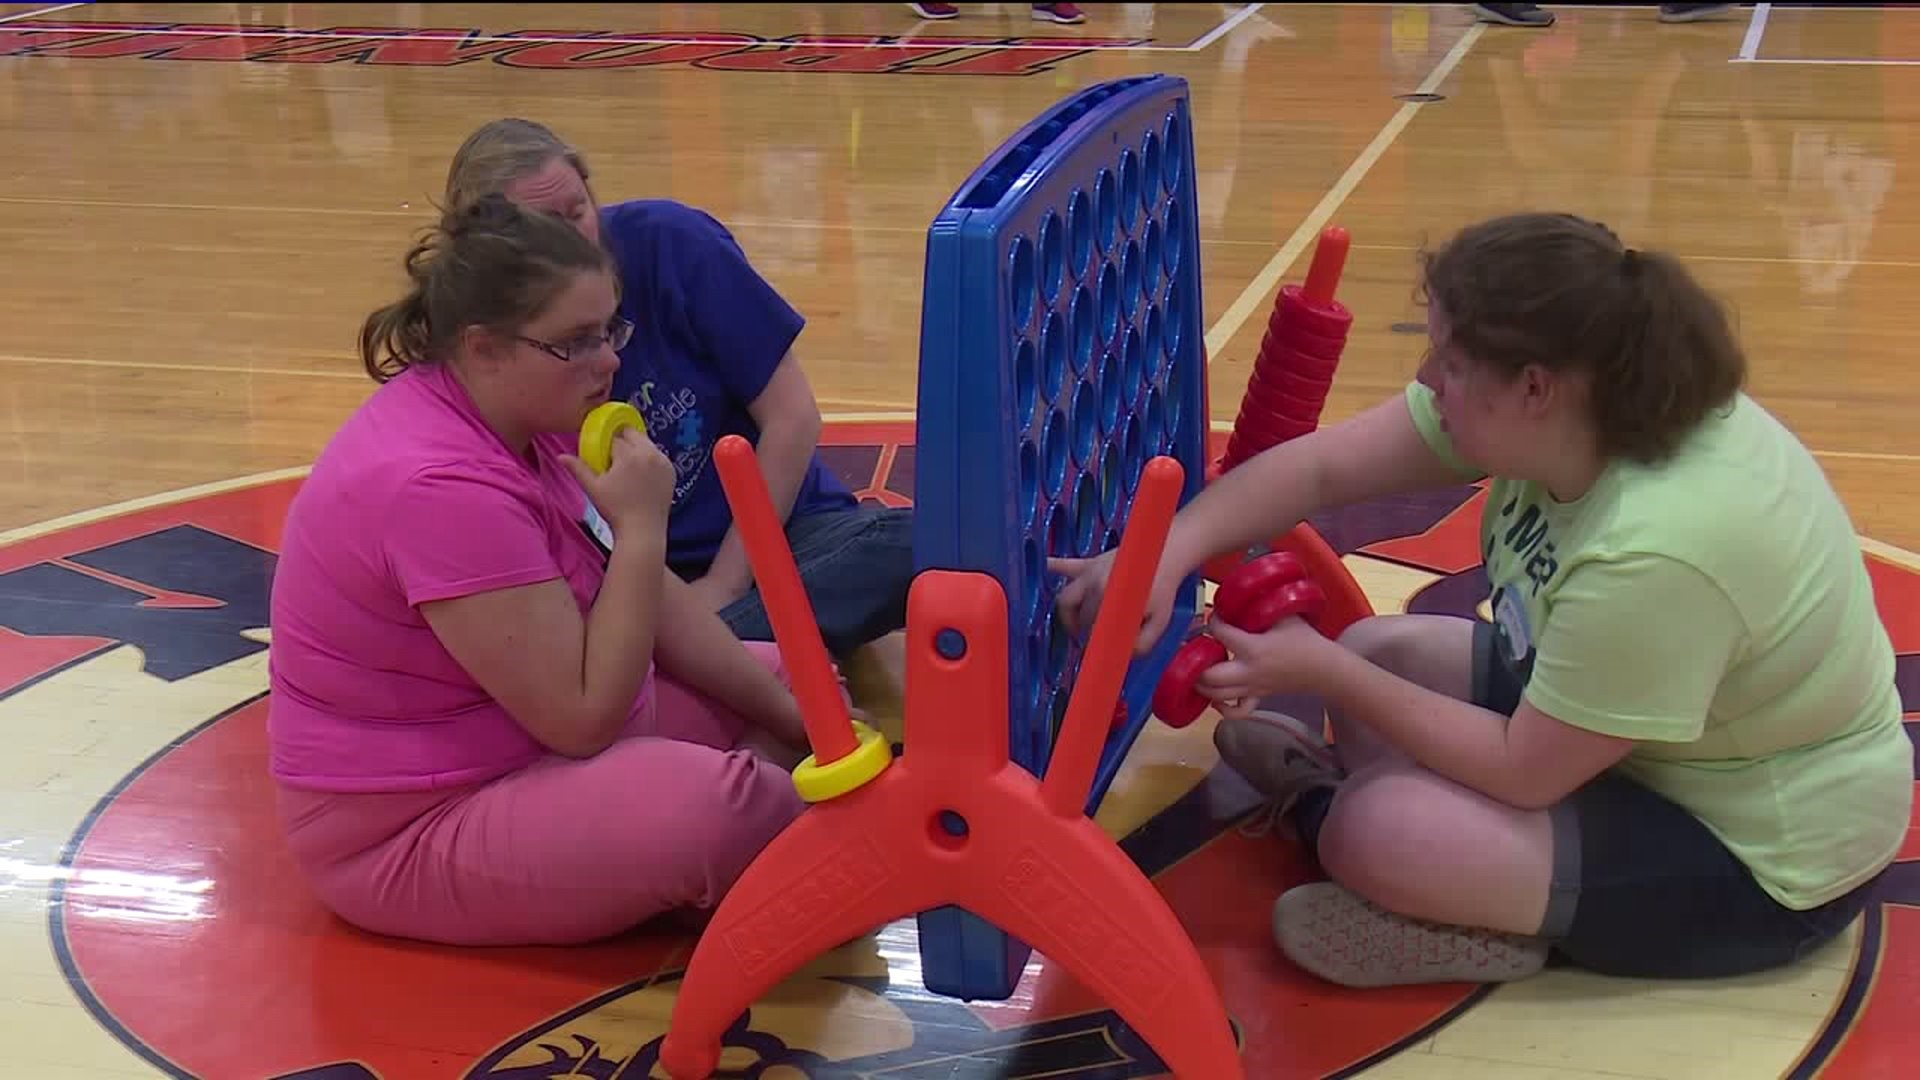 Students in Montour County Play Life-sized Games